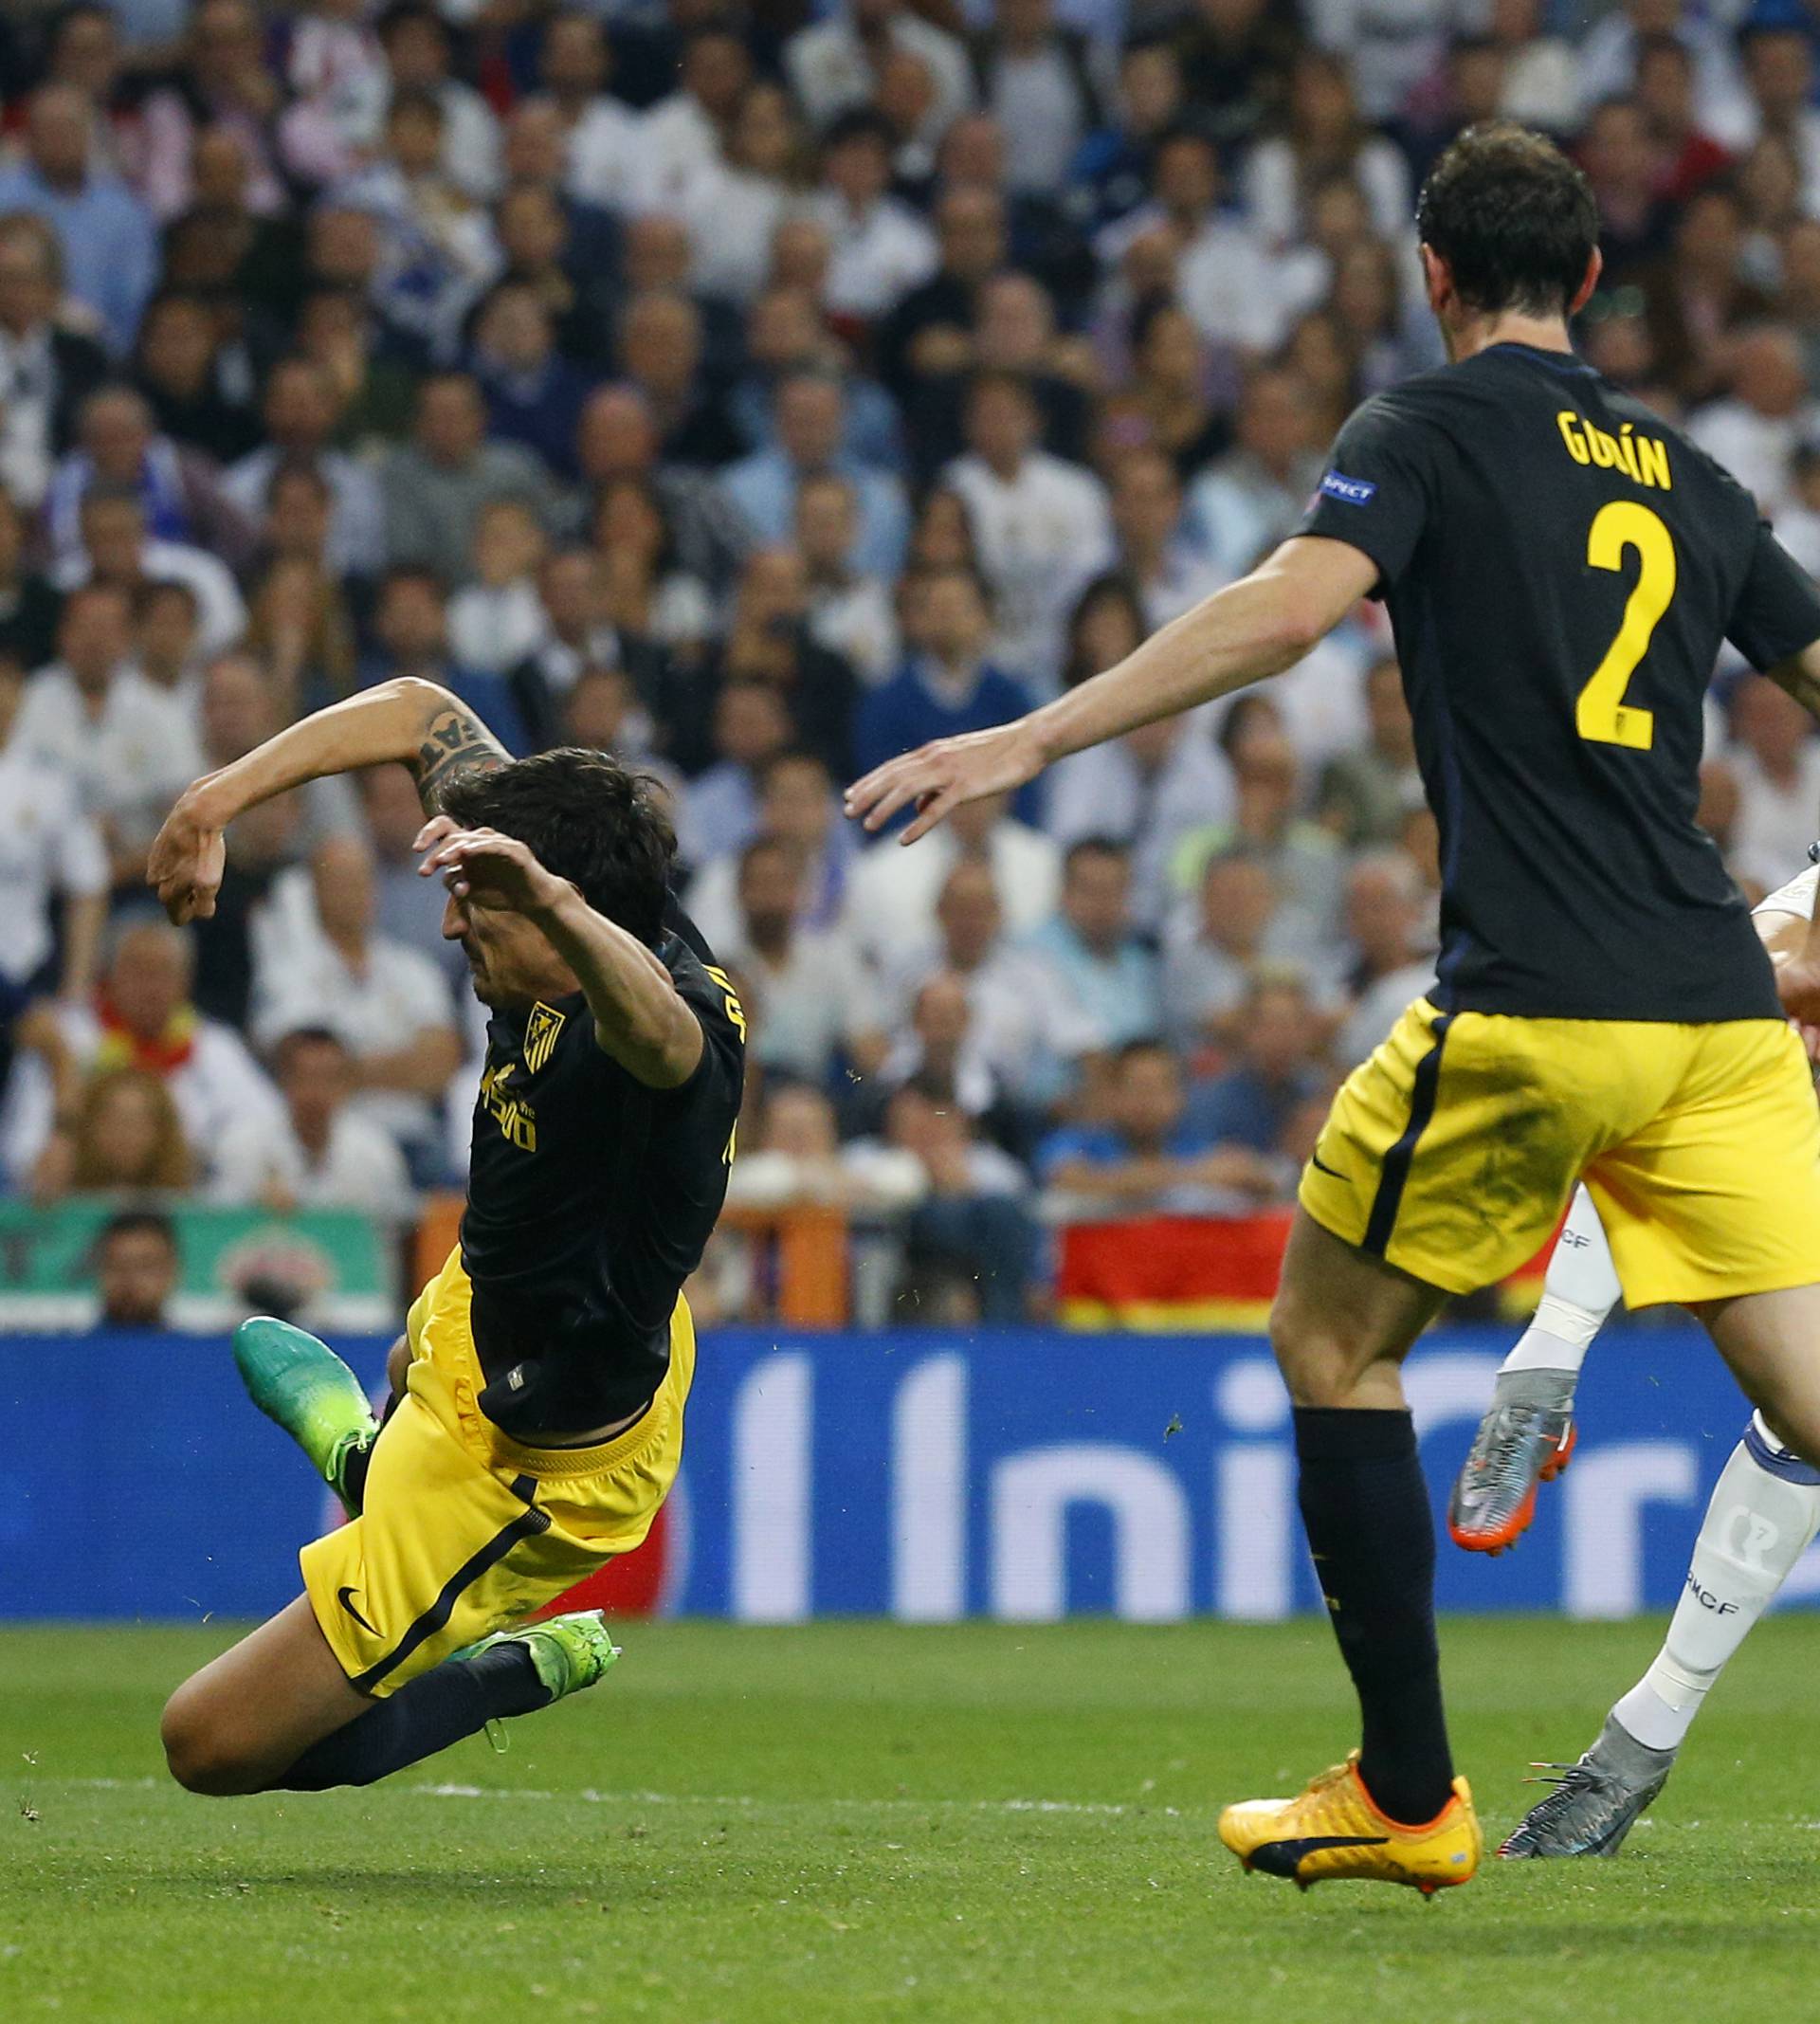 Real Madrid's Cristiano Ronaldo scores their second goal